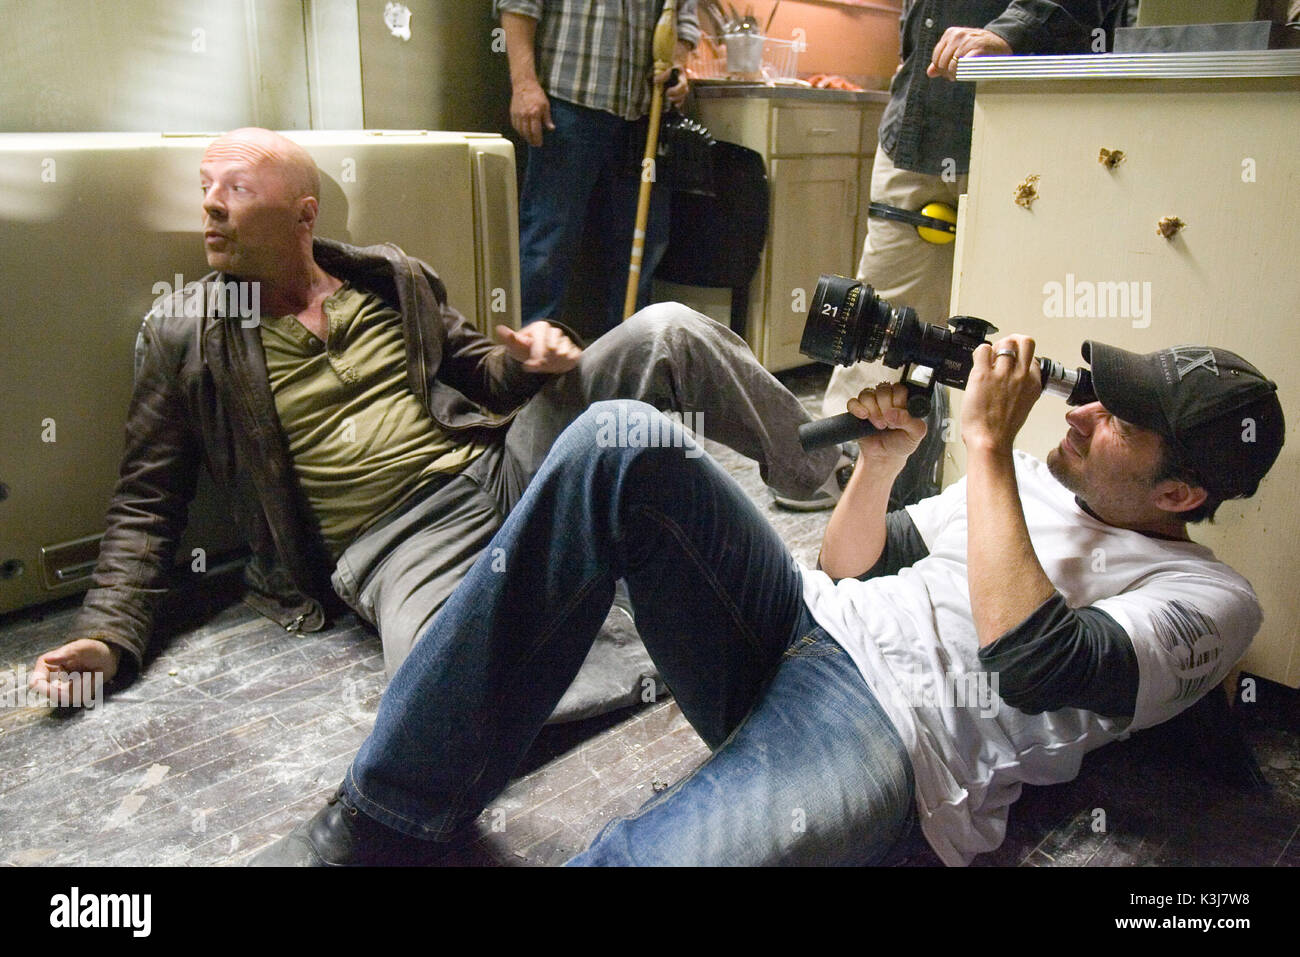 PHOTOGRAPHS TO BE USED SOLELY FOR ADVERTISING, PROMOTION, PUBLICITY OR REVIEWS OF THIS SPECIFIC MOTION PICTURE AND TO REMAIN THE PROPERTY OF THE STUDIO. NOT FOR SALE OR REDISTRIBUTION LIVE FREE OR DIE HARD aka DIE HARD 4.0 BRUCE WILLIS as Det. John McClane [left], Director LEN WISEMAN [right]     Date: 2007 Stock Photo